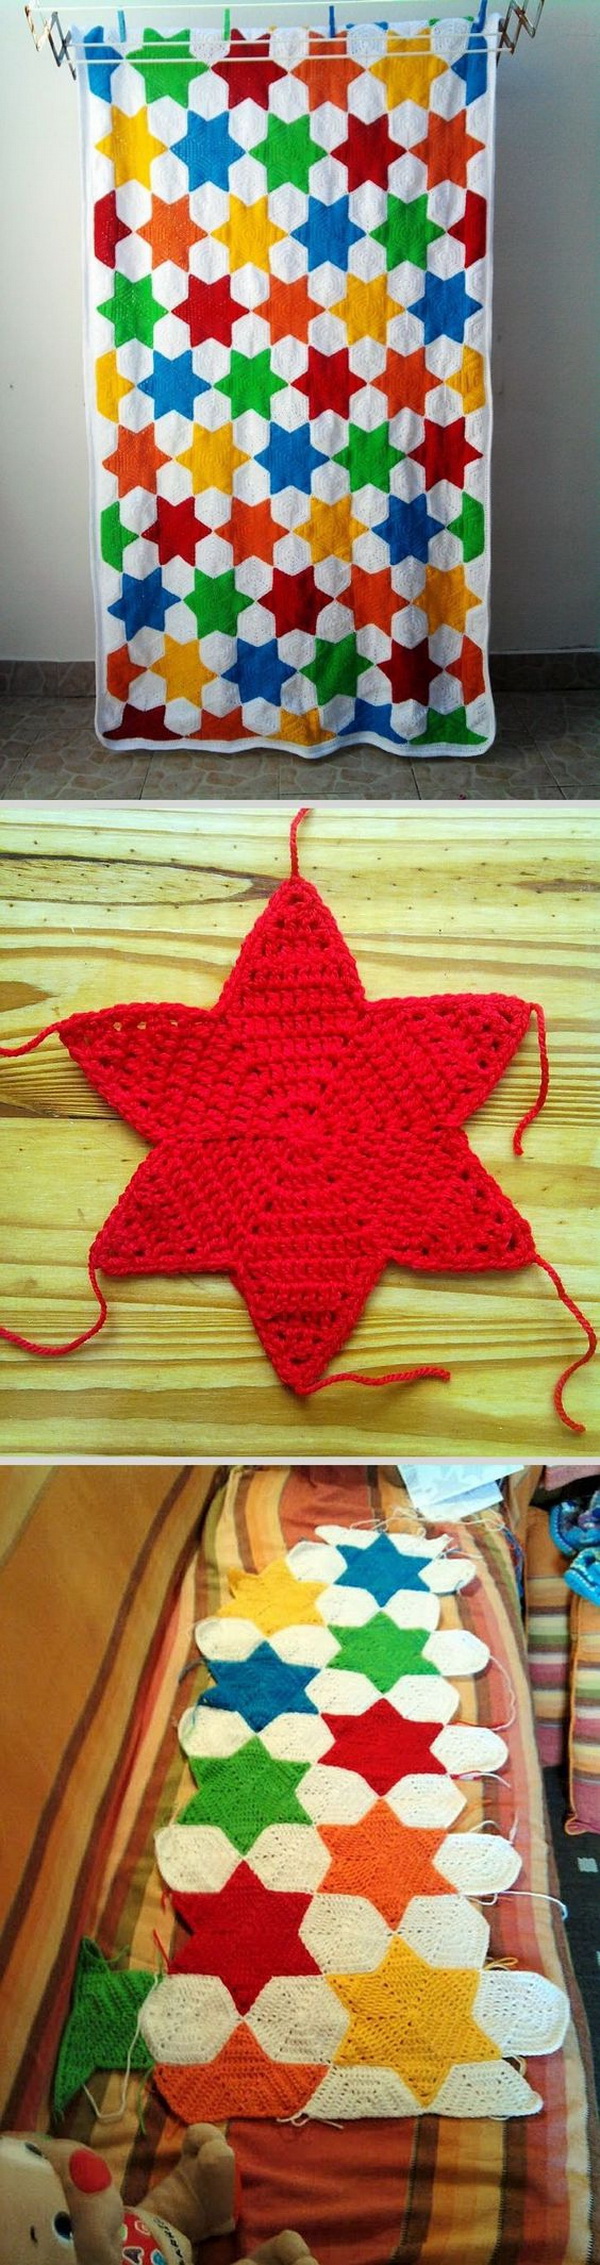 Hexagon Based Crochet Star Blanket. This crochet star blanket is made with lots of different coloured stars and hexagon based stitch patterns. It is a both functional and decorative item for your home. 